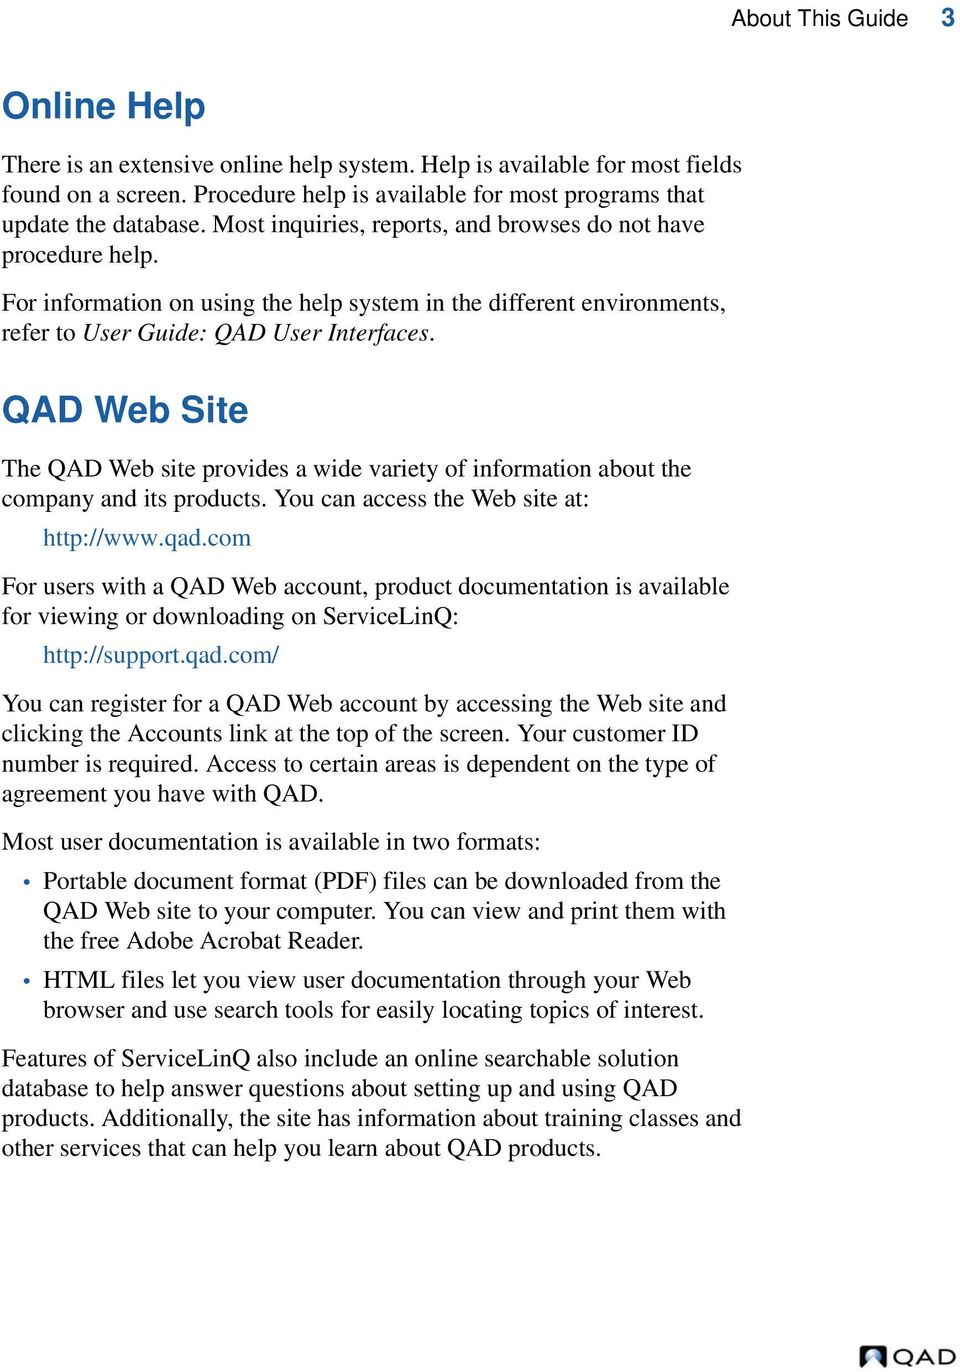 QAD Web Site The QAD Web site provides a wide variety of information about the company and its products. You can access the Web site at: http://www.qad.